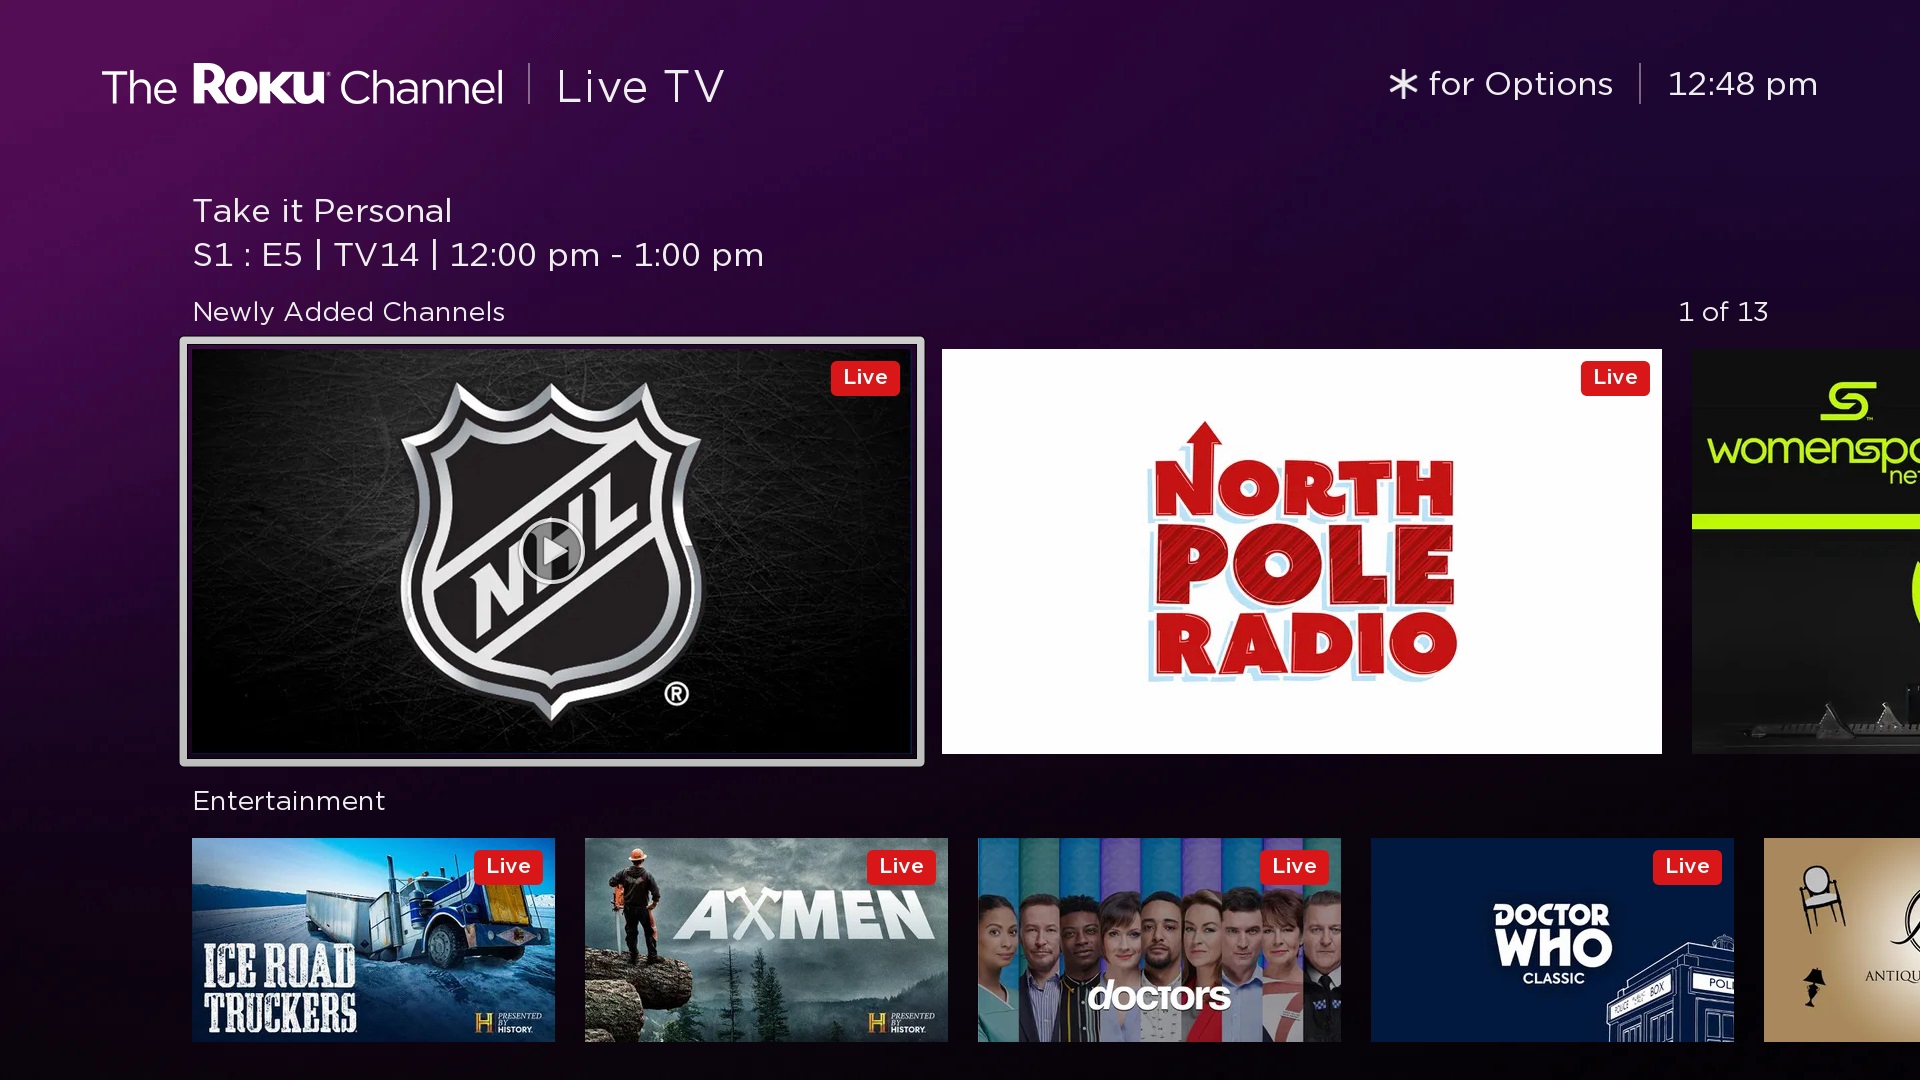 If you have a Roku, youre getting 13 new channels for free this month